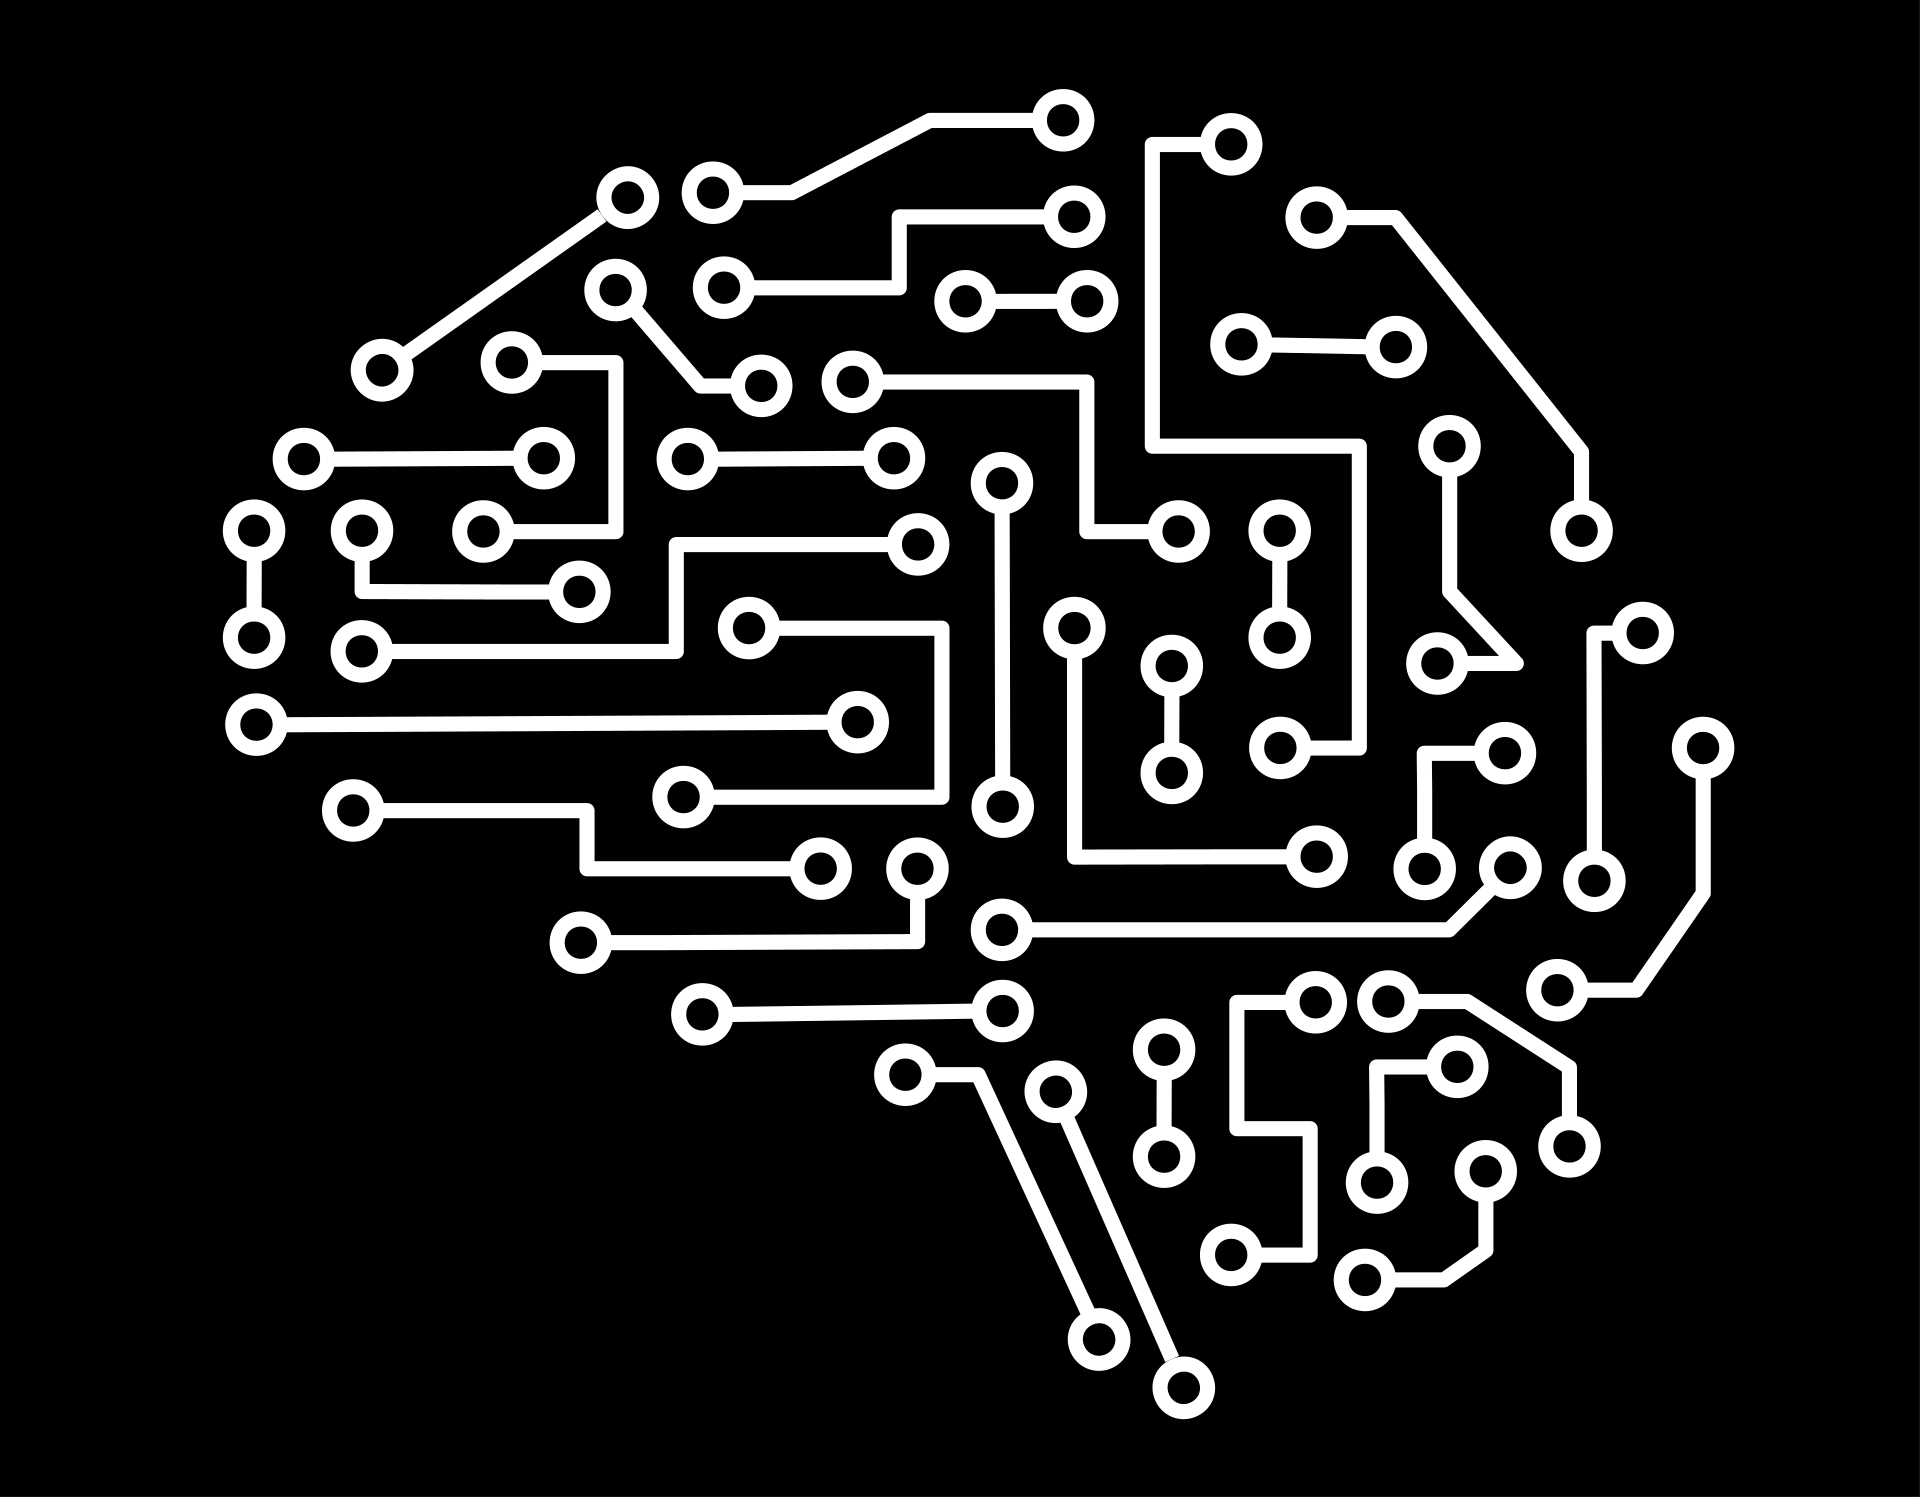 A black-and-white line art graphic of a circuits in the shape of a brain.